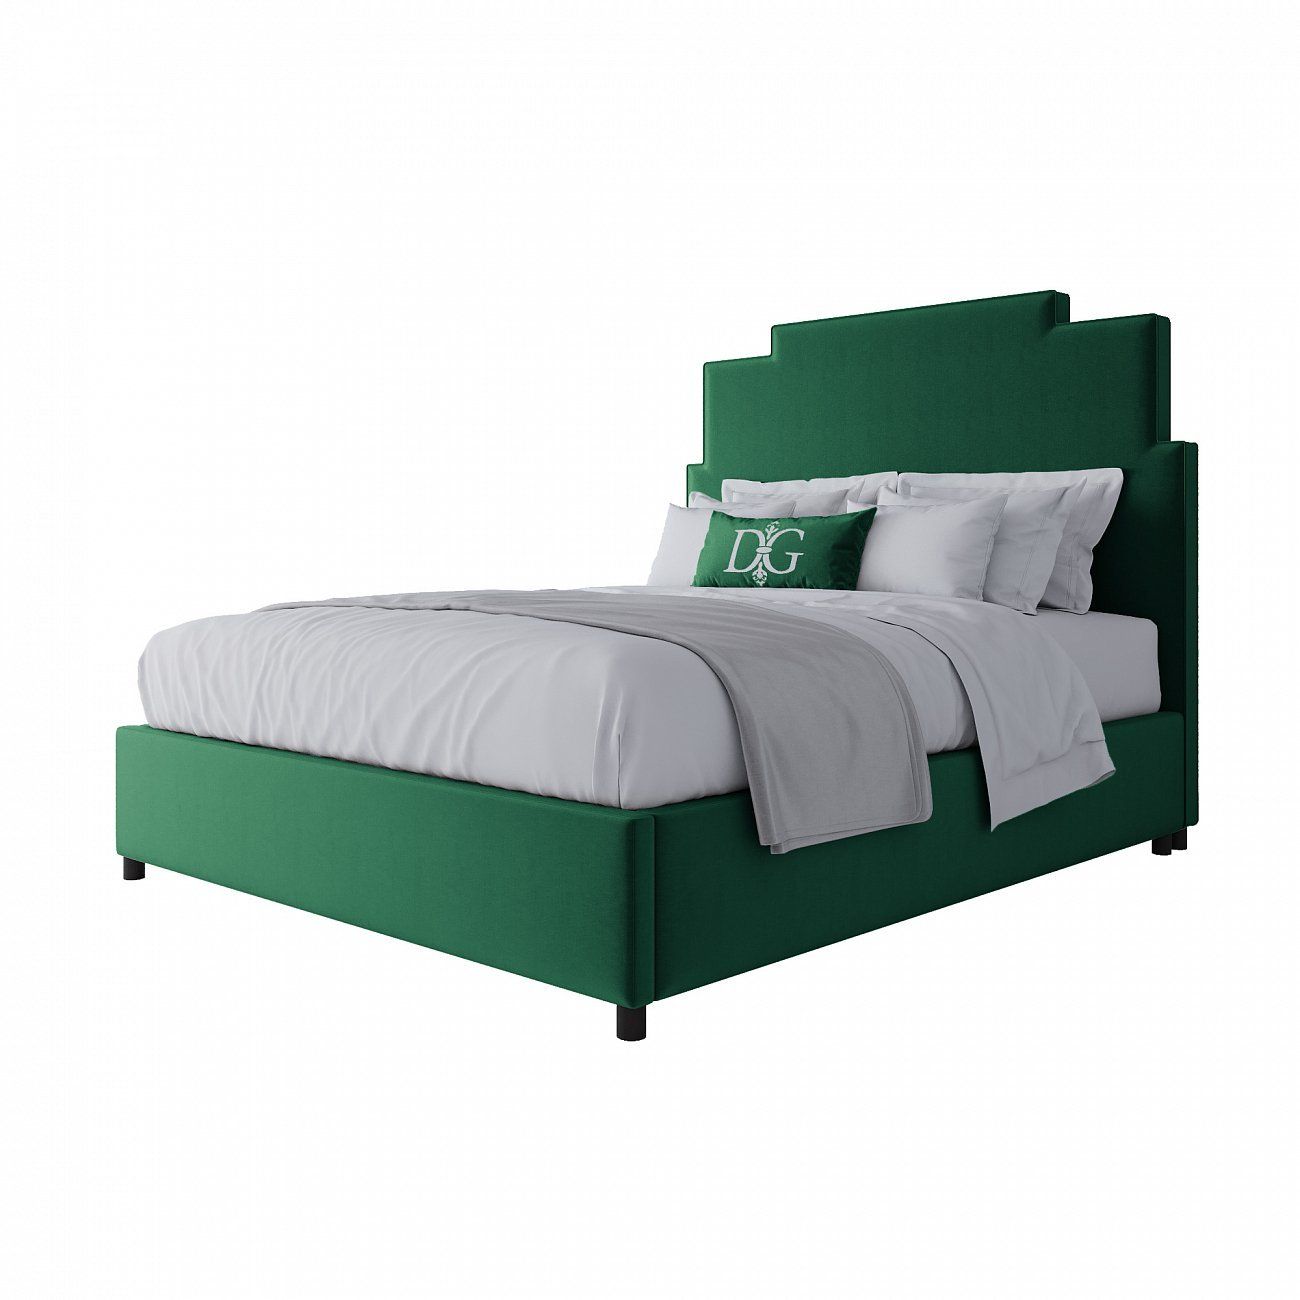 Double bed 160x200 cm green Paxton Emerald Velvet